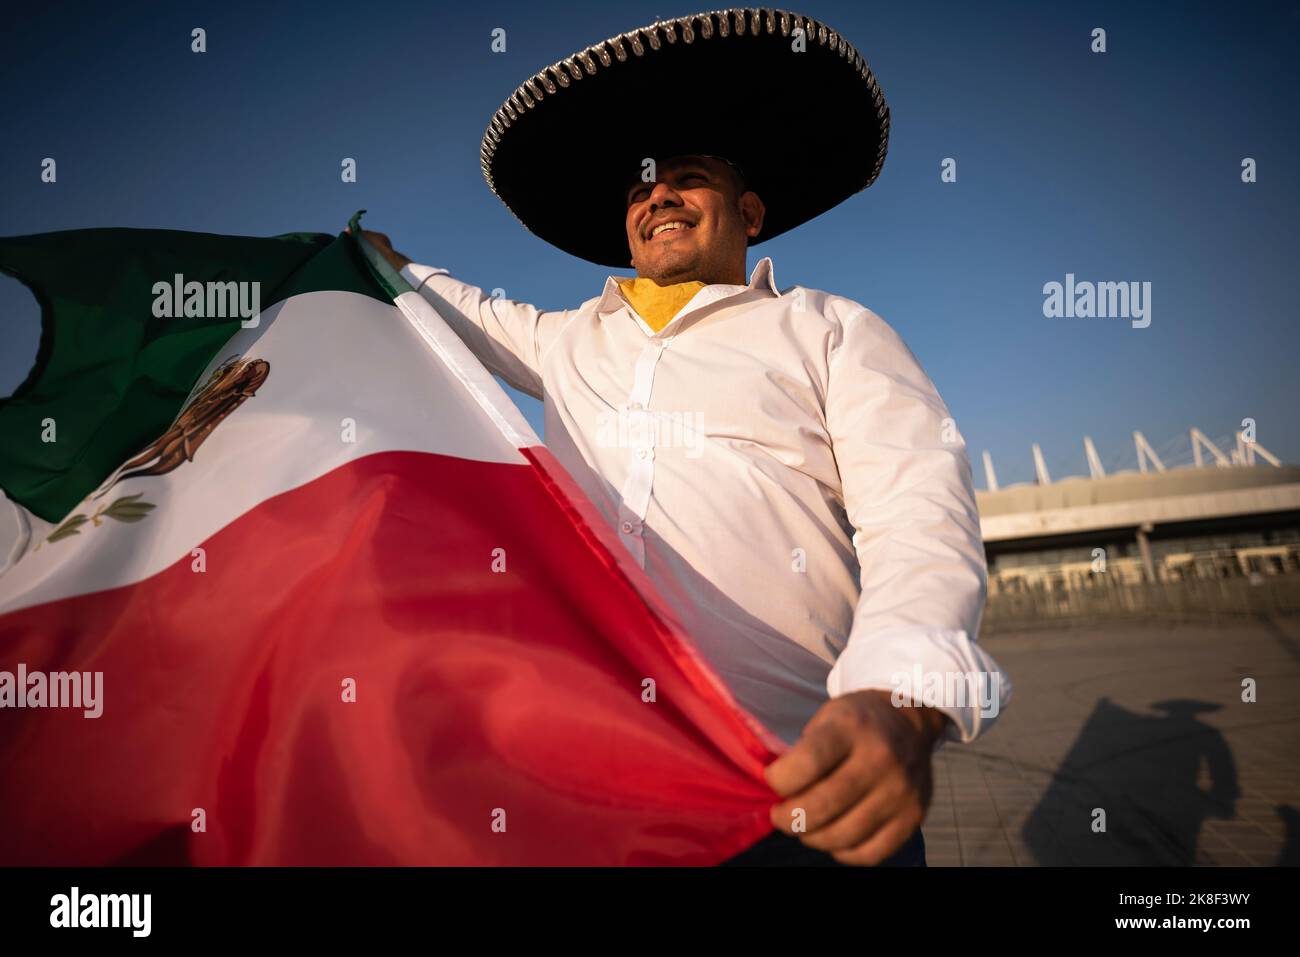 Smiling man wearing sombrero holding Mexican flag on sunny day Stock Photo